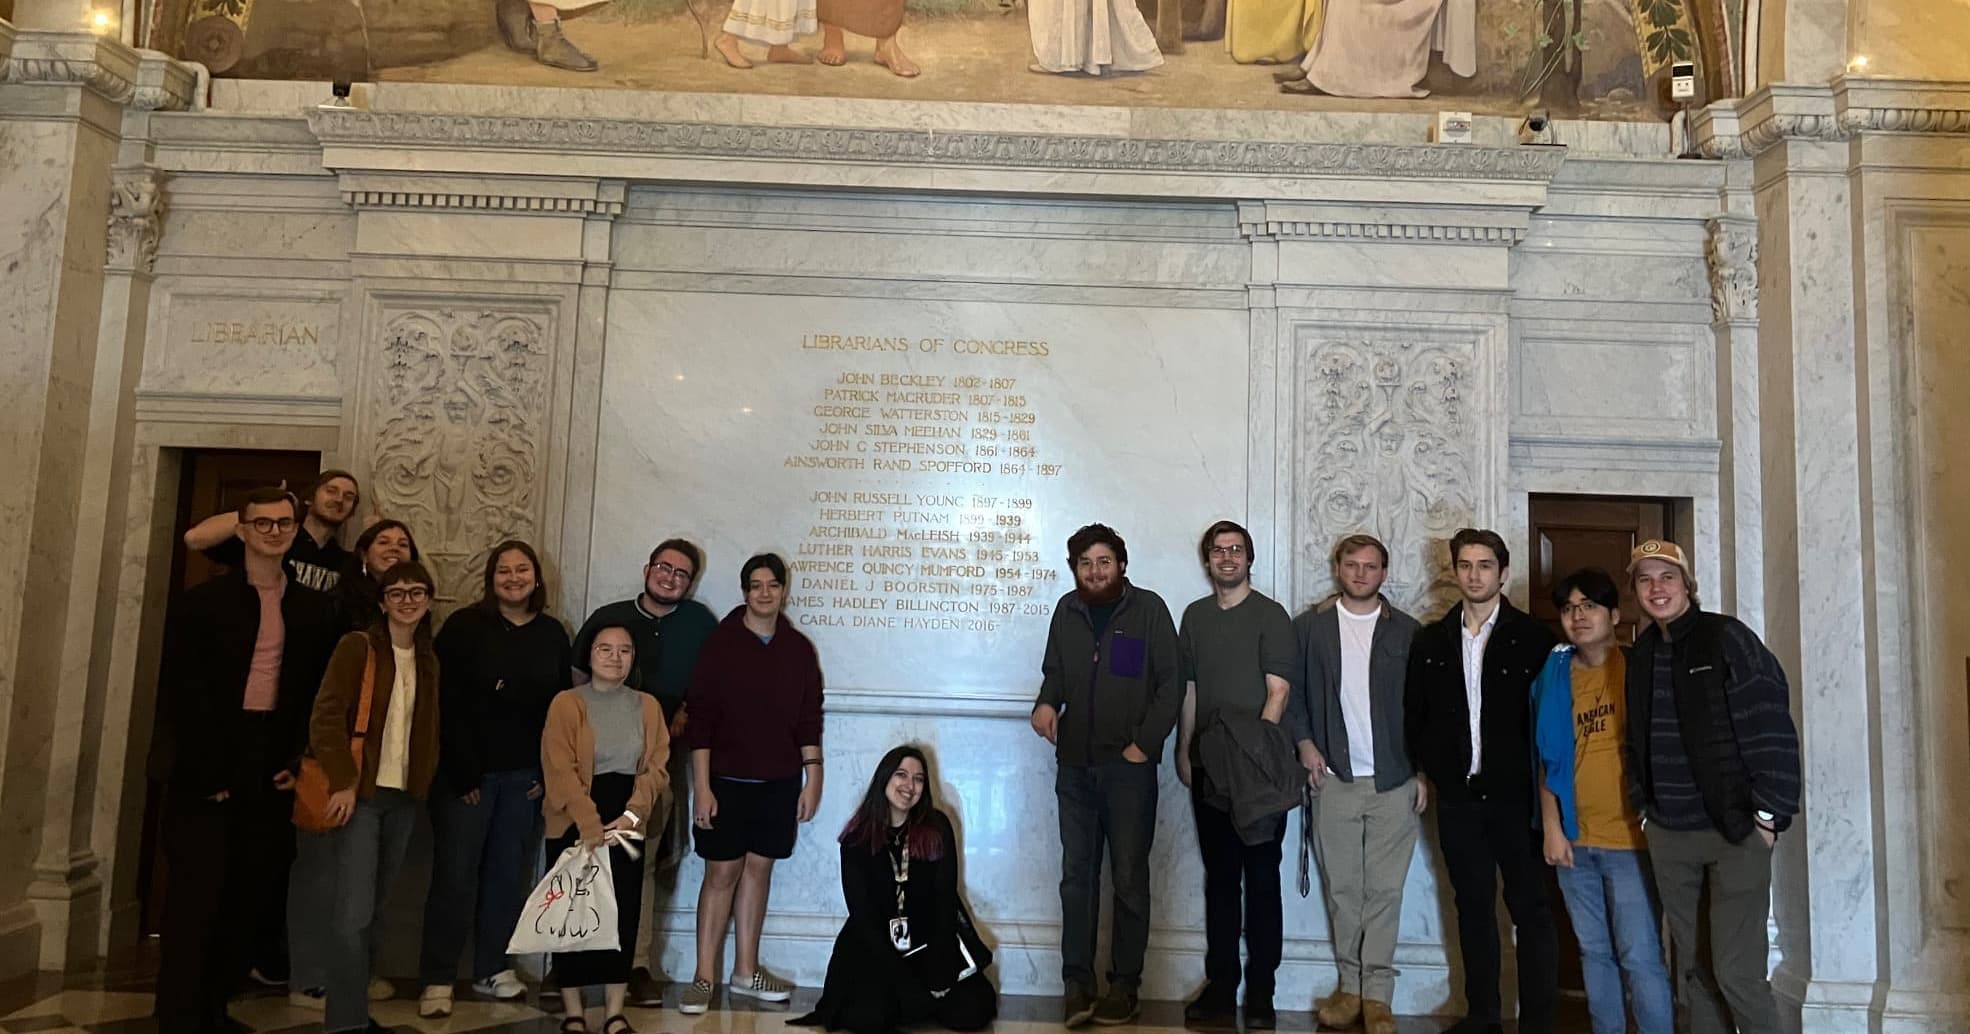 The students next to a gorgeously-decorated wall inside the Library of Congress.